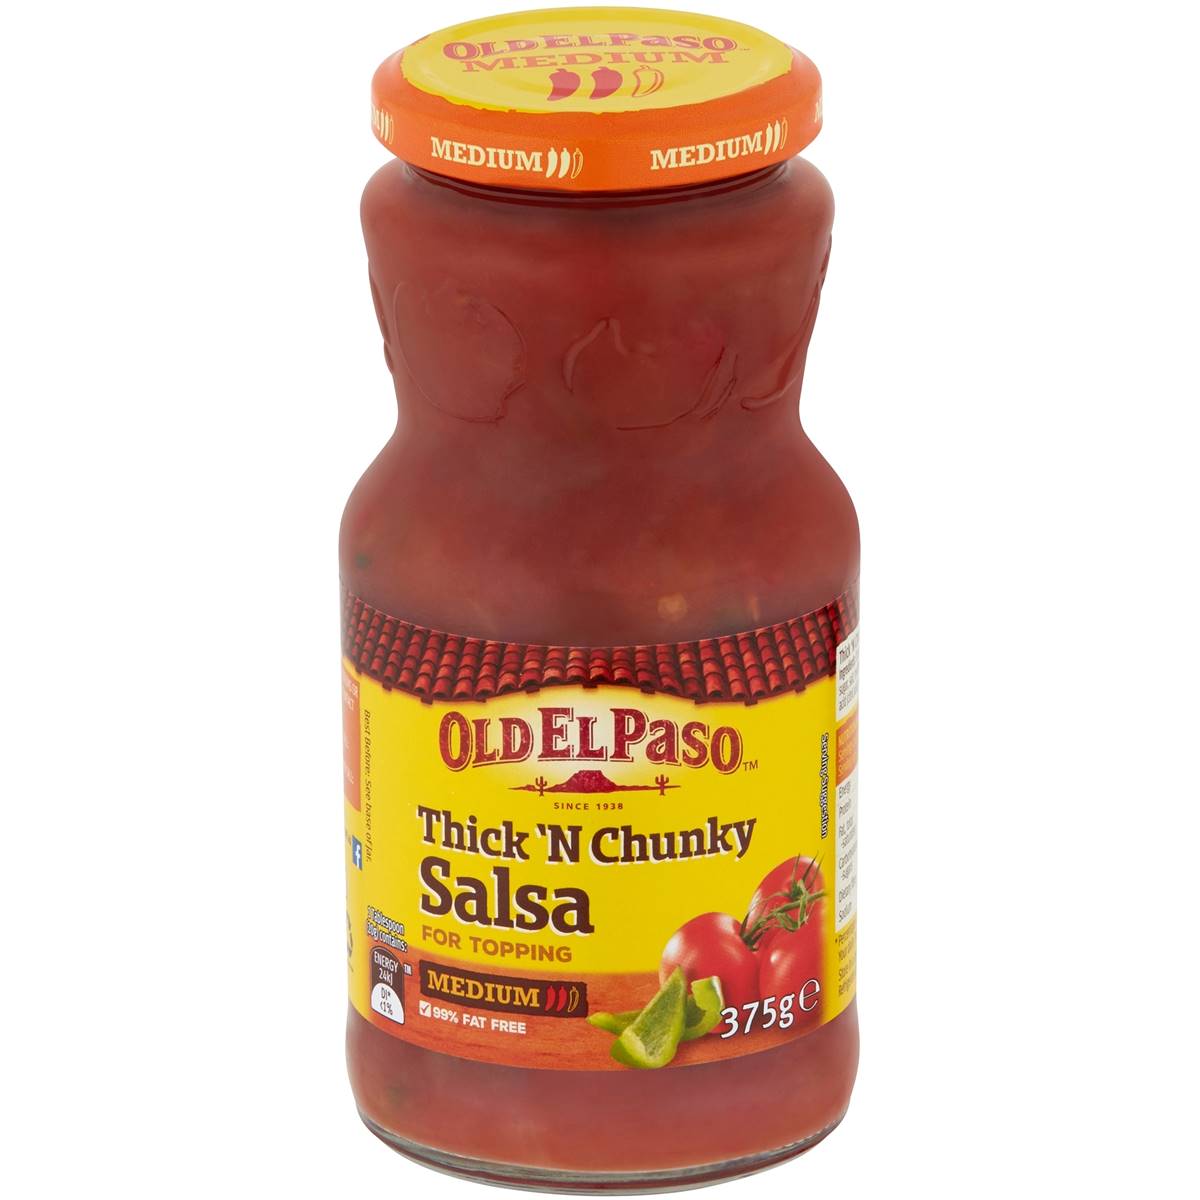 Calories in Old El Paso Thick 'n Chunky Salsa Medium Thick & Chunky